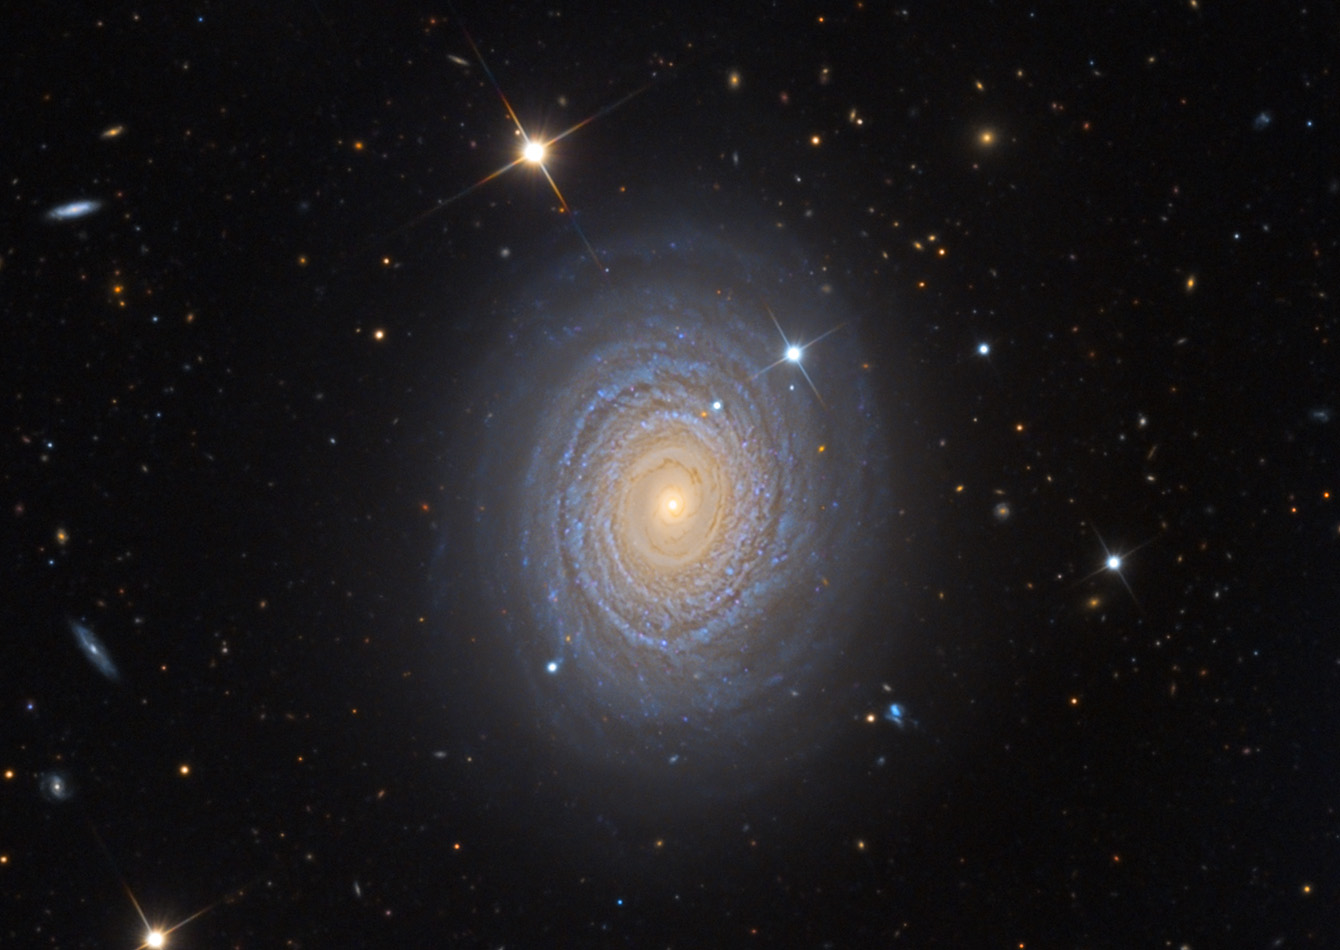 Spiral galaxies are delicate and subtle things. Even when captured in large telescopes- more striking than their beauty is the concept that they are so large and so far away. NGC 488 in particular is around 90 MILLION light years away and certainly looks better than its name might suggest.